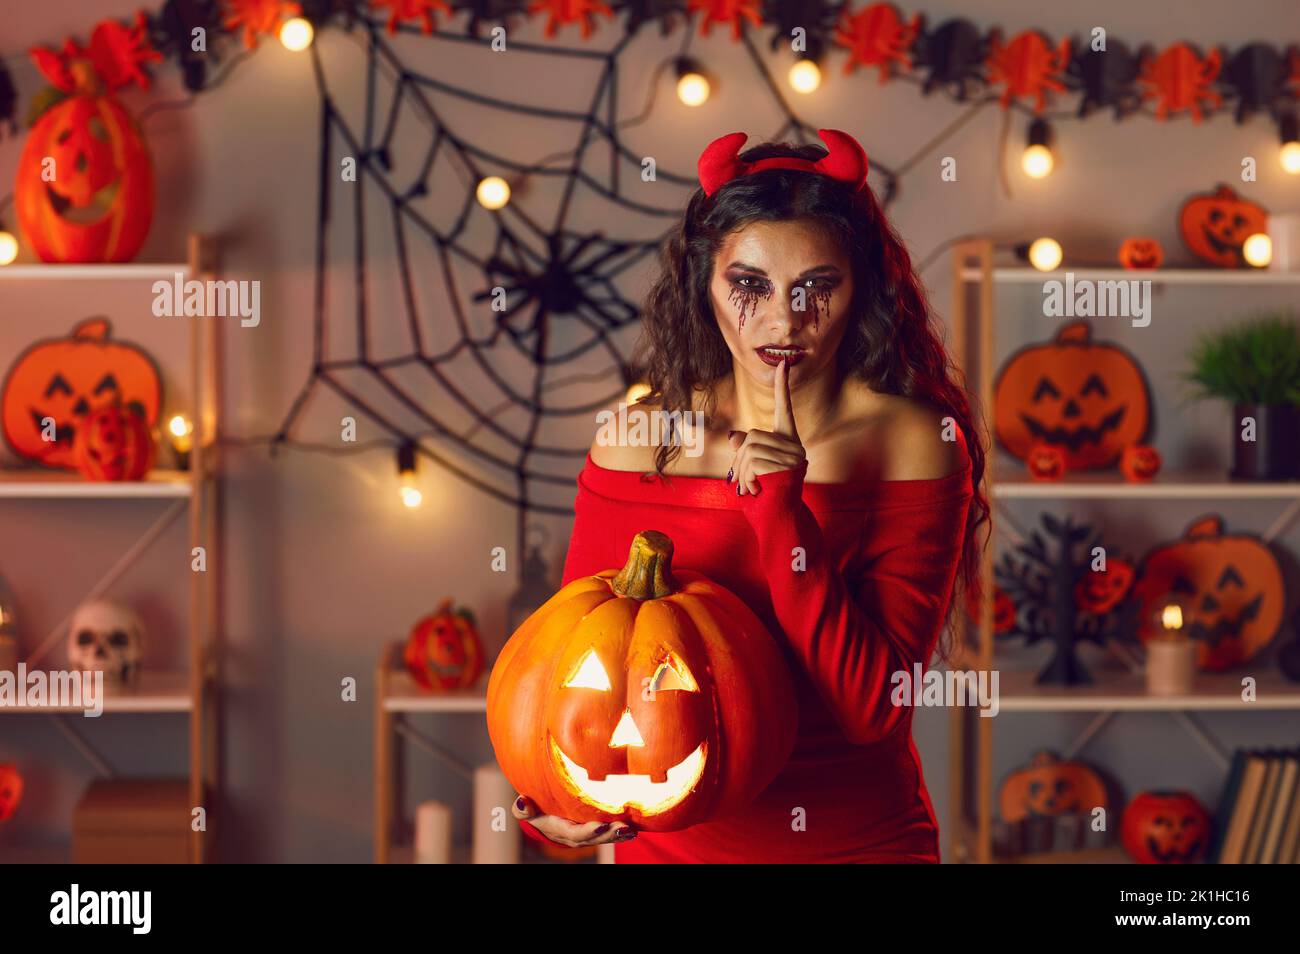 Woman dressed up as devil doing Shh finger on lip gesture at secret Halloween party Stock Photo